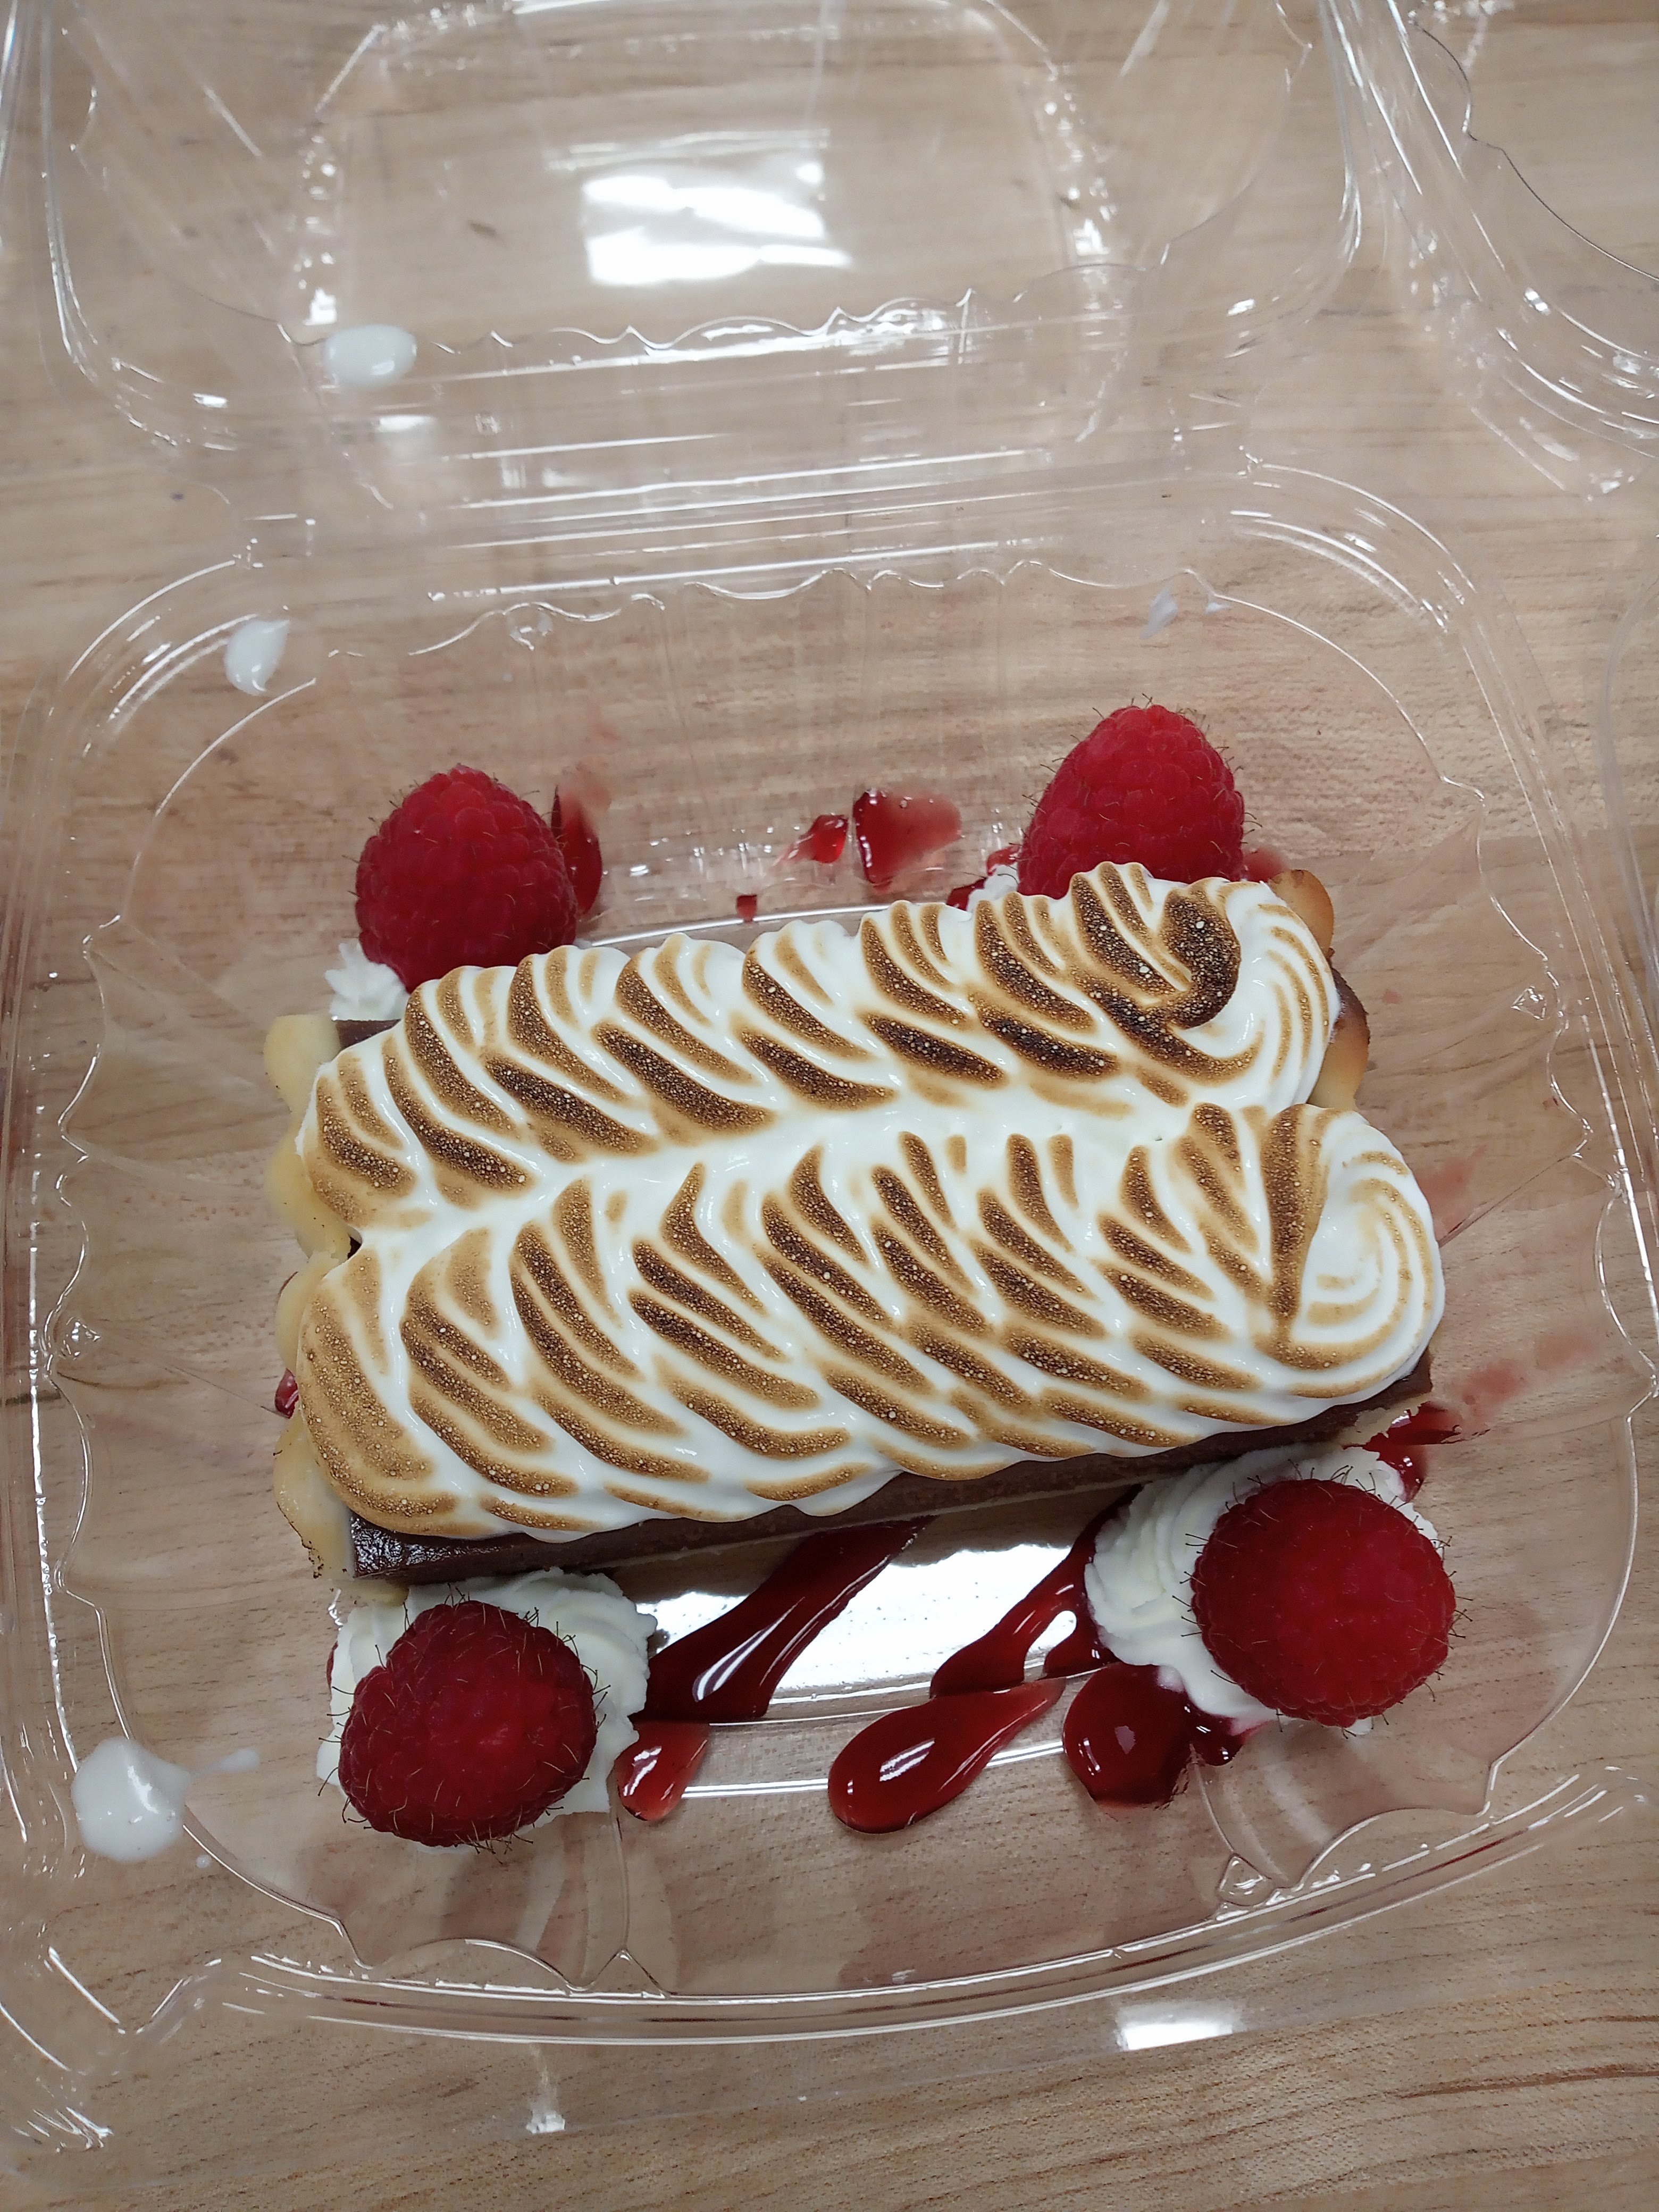 a rectangle piece of chocolate tart covered in piped toasted meringue in a clear to go container with whipped cream, drizzled red raspberry sauce, and fresh raspberries